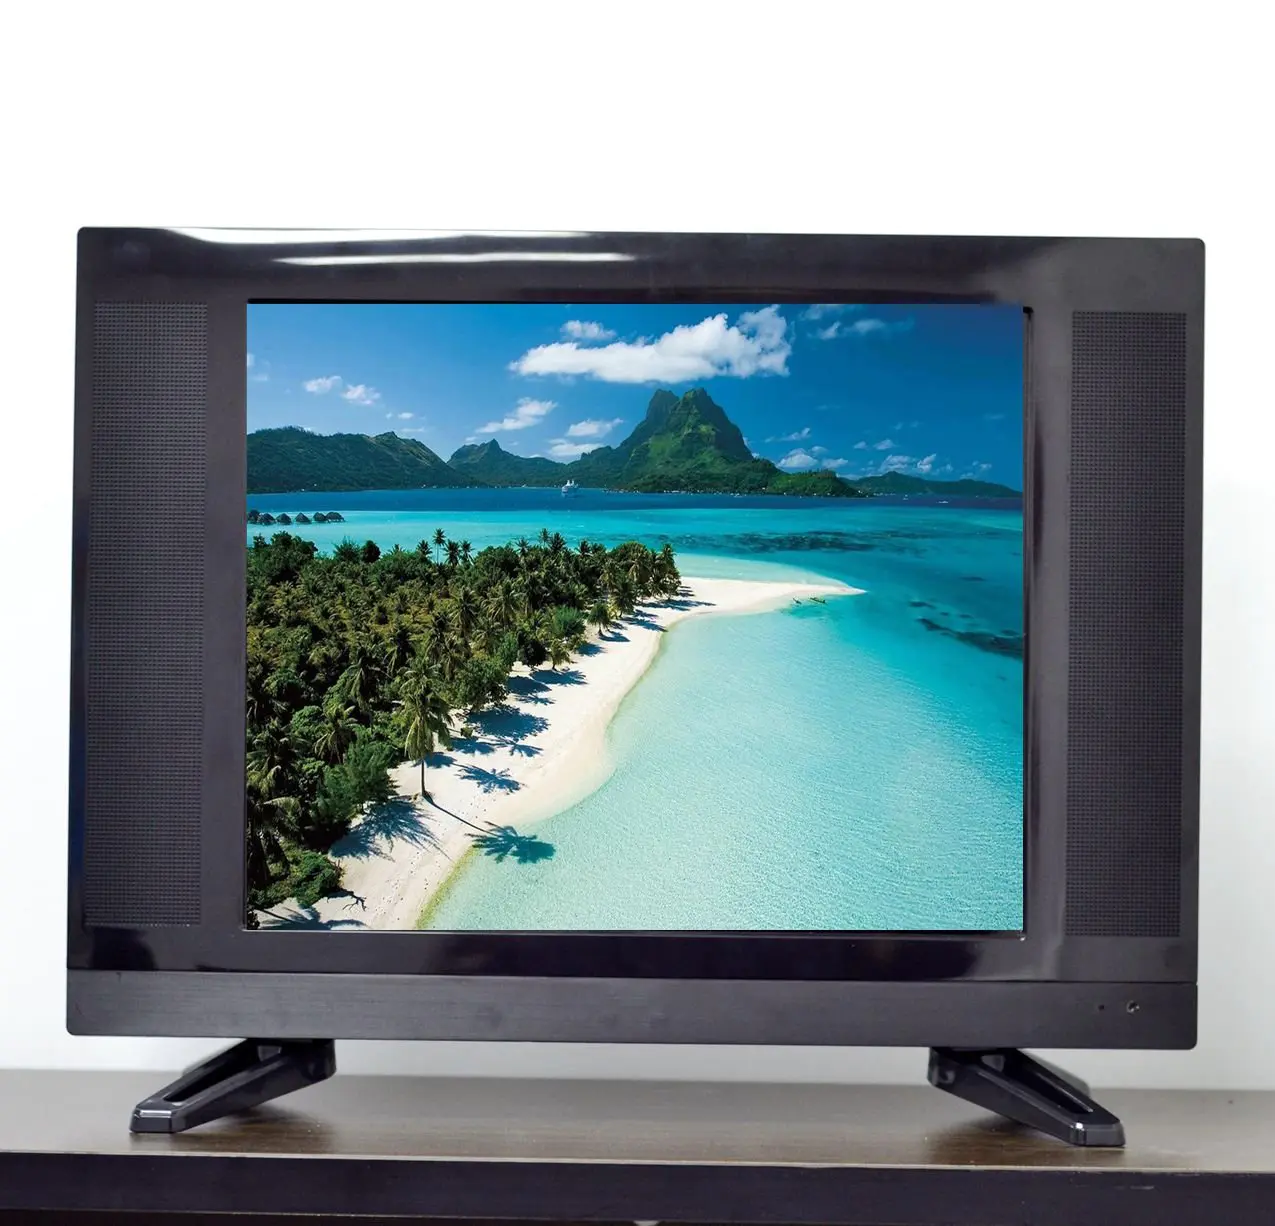 lcd tv 15 inch price with panel for lcd screen